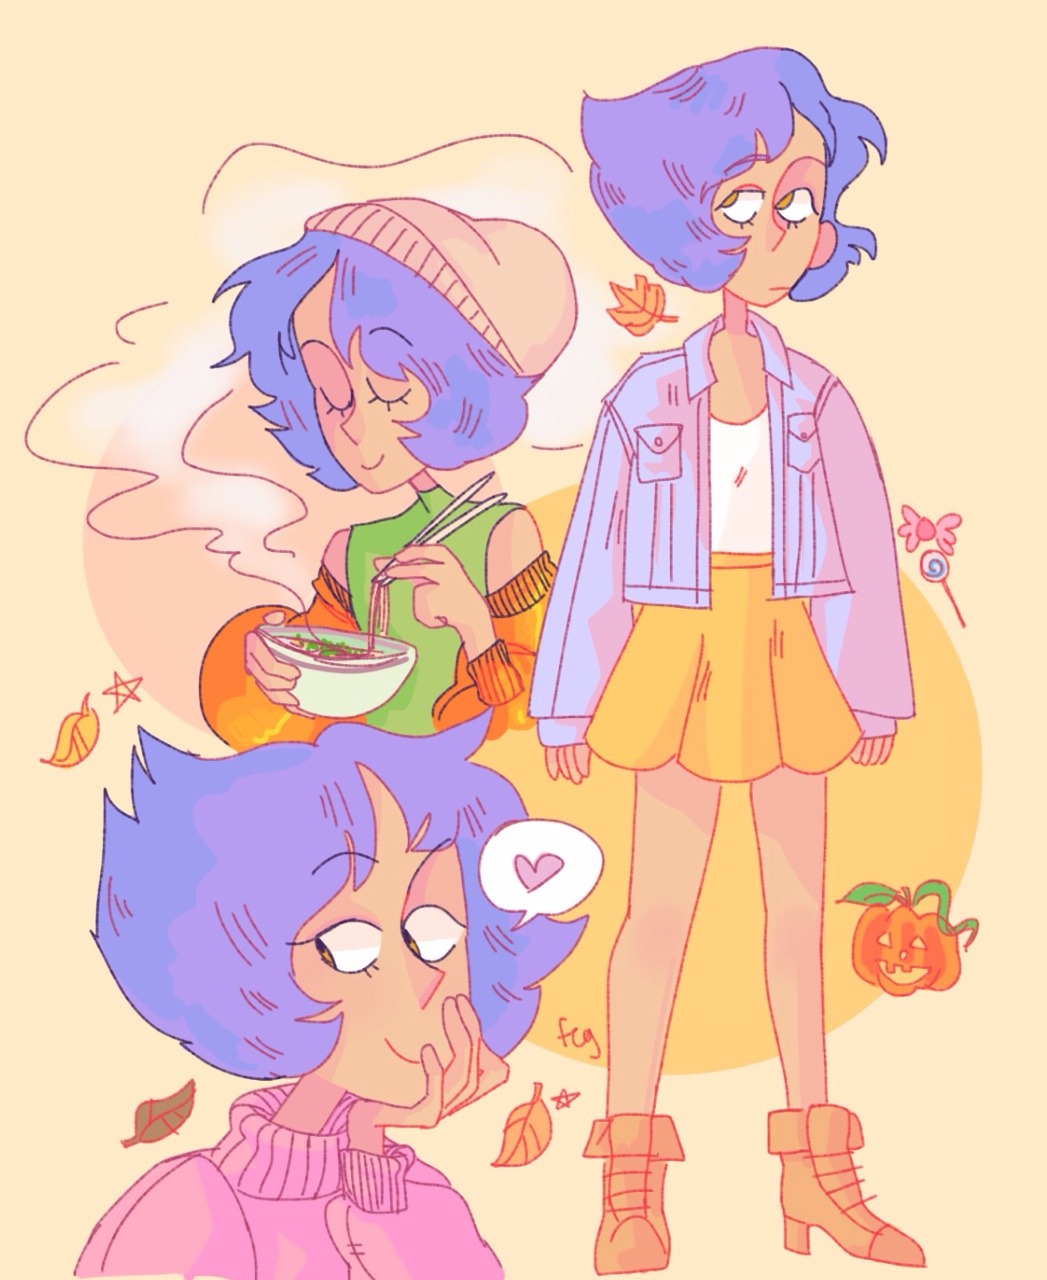 More fall outfits!